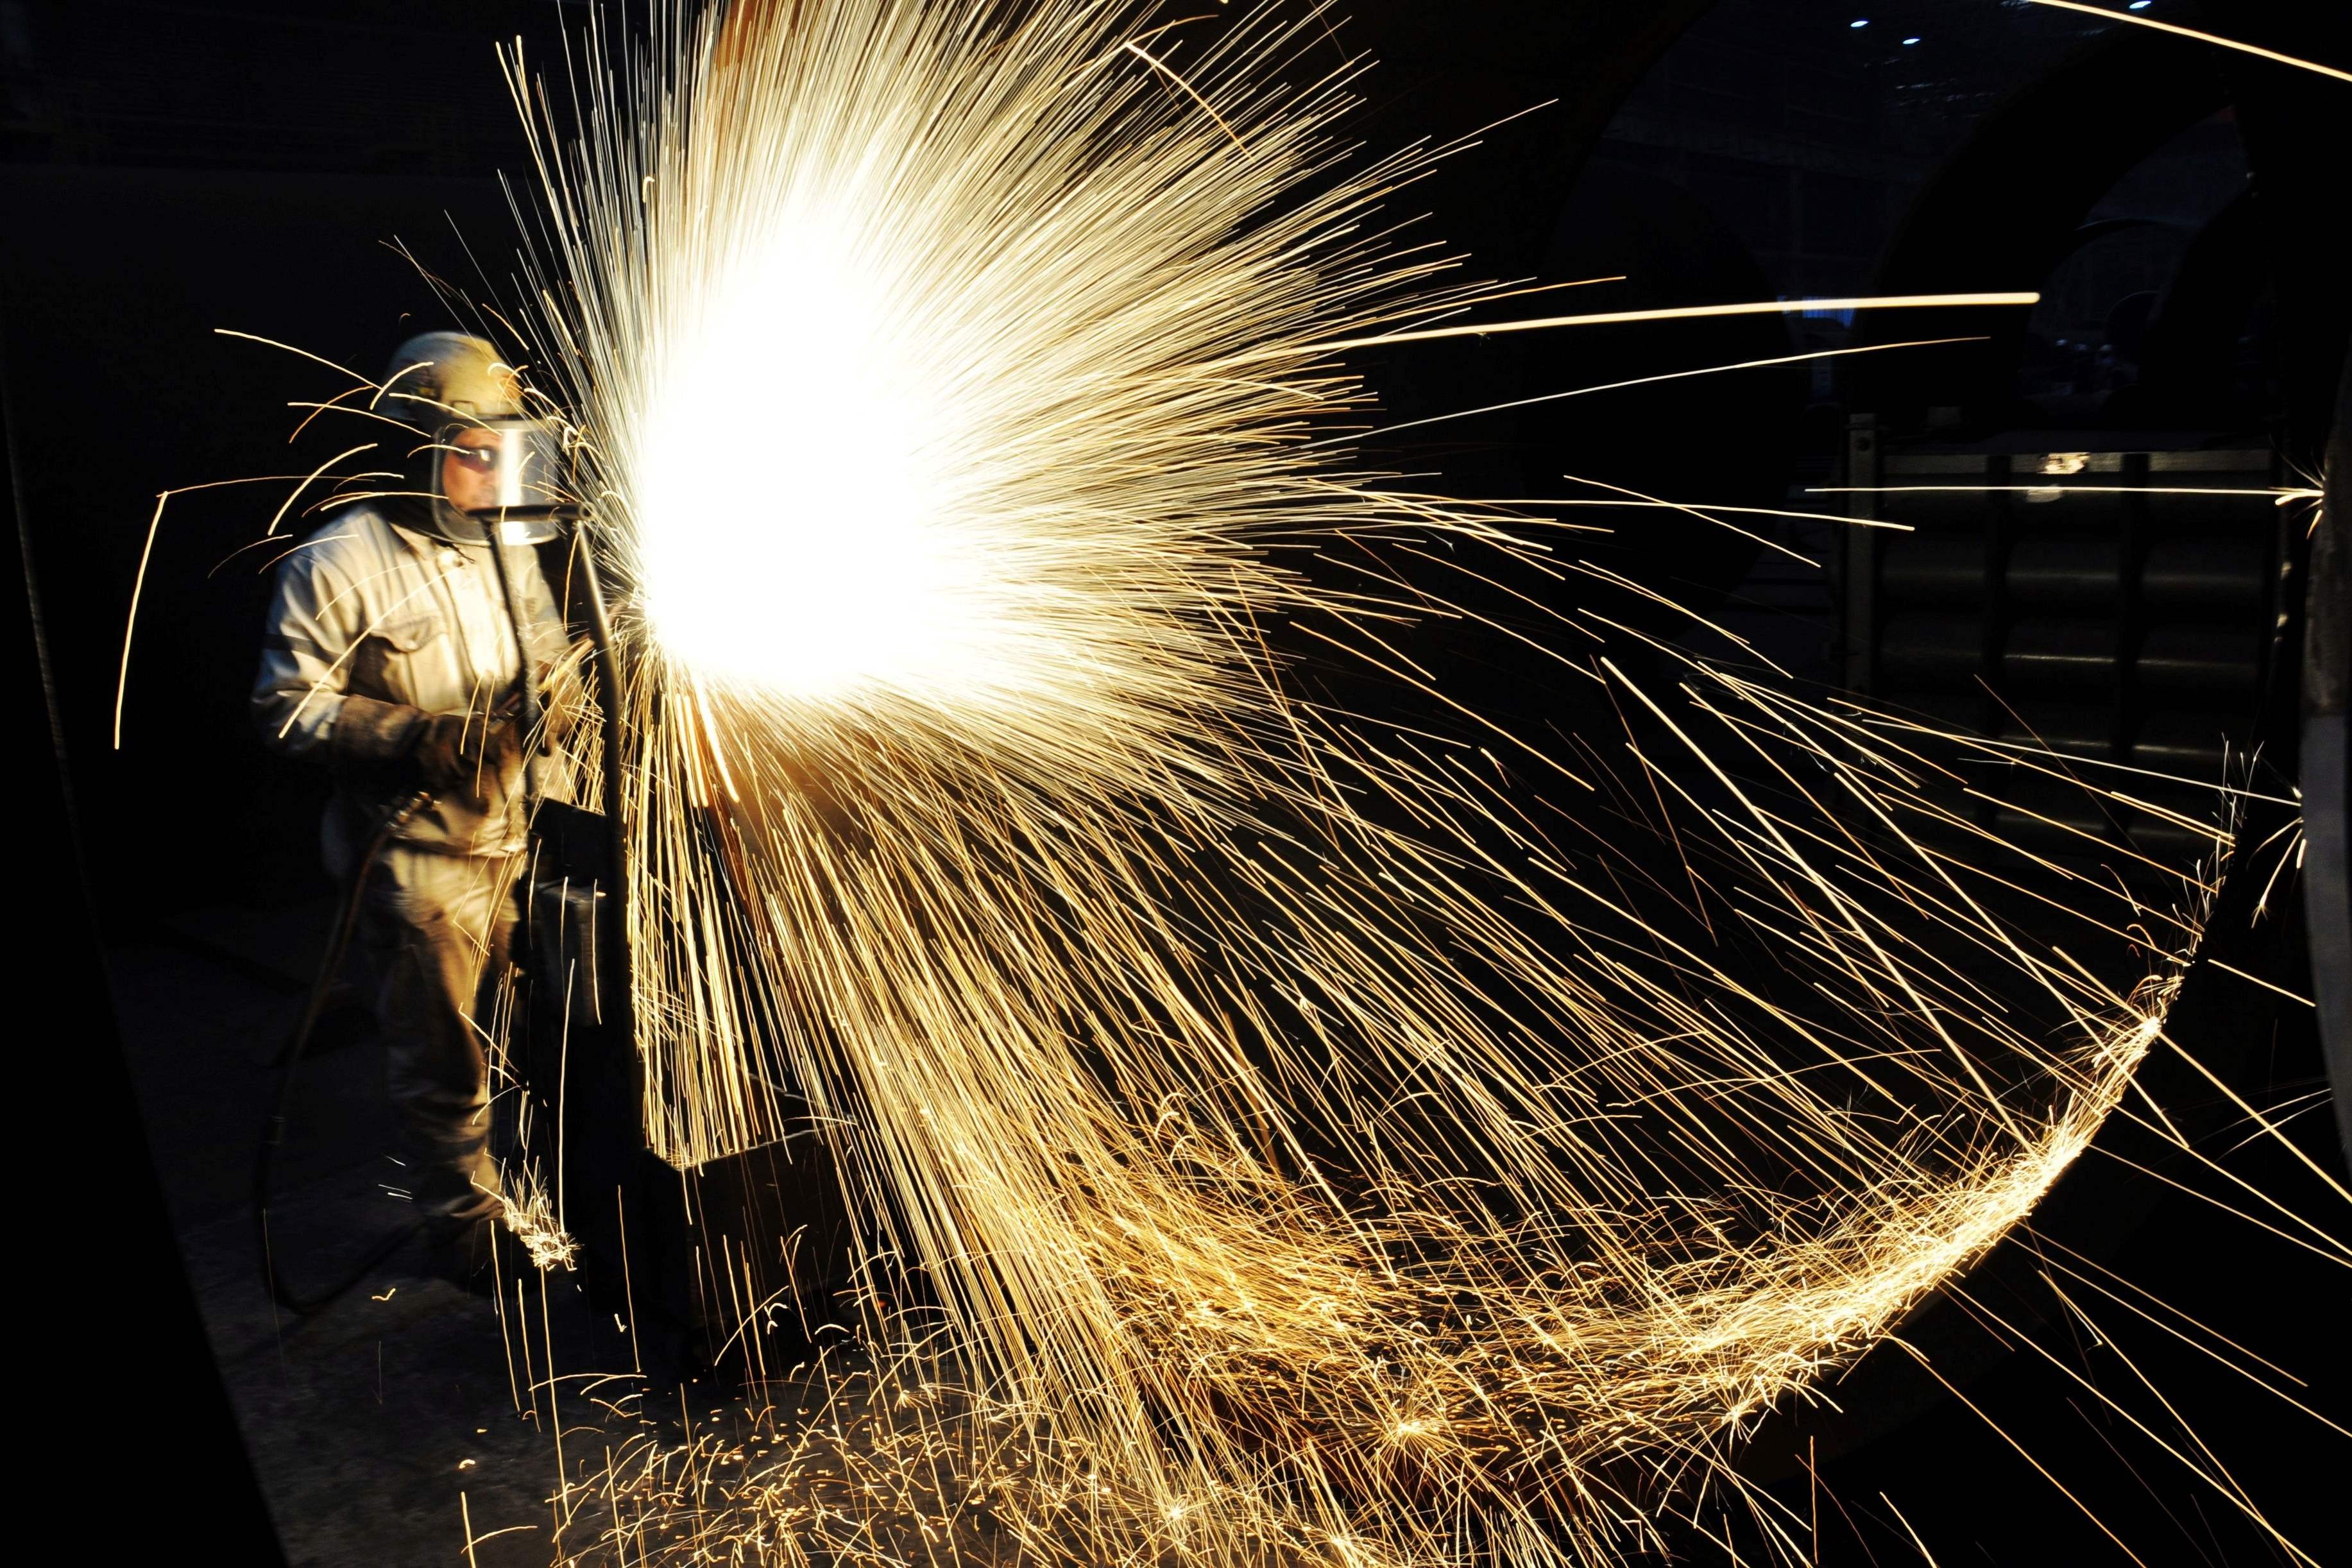 A Chinese worker cutting steel in Qingdao in China's eastern Shandong province. Despite fierce opposition from inside the White House, US President Donald Trump has confirmed punishing steel and aluminium tariffs, teeing up a potential trade war with major producers, as well as China. Photo: AFP